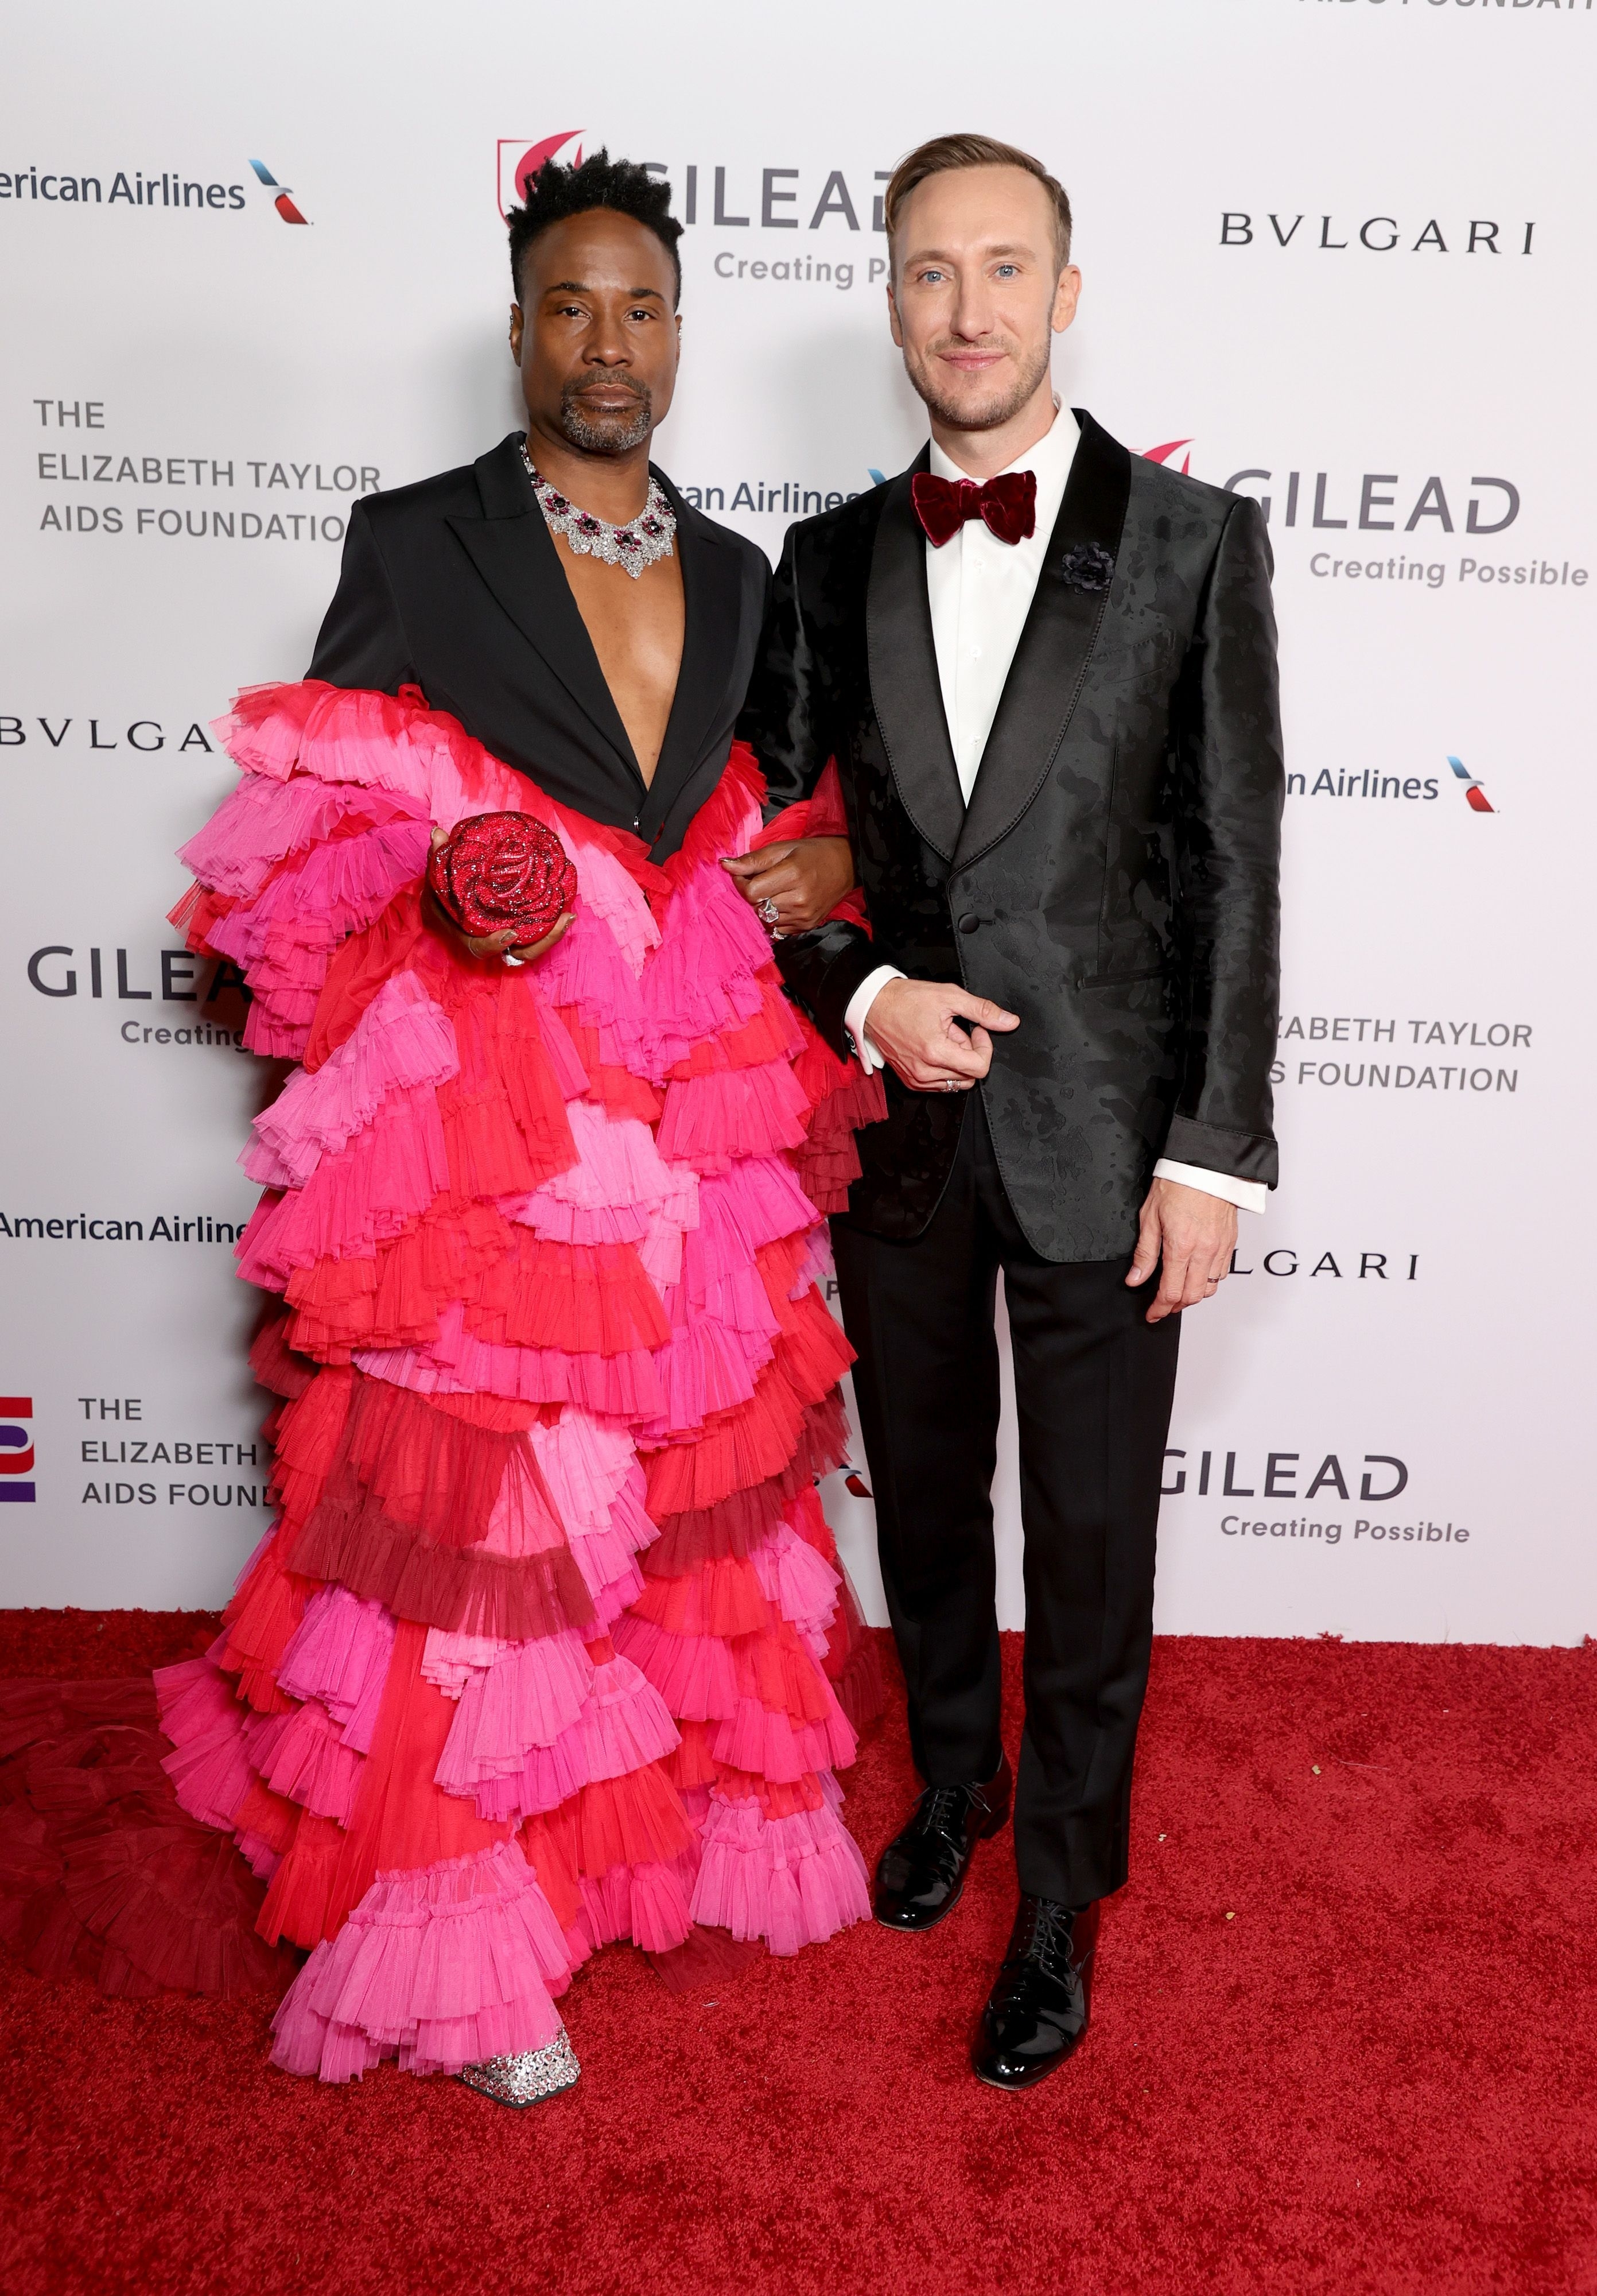 Billy, in a multitiered colorful outfit, and Adam, in a tux, arm in arm on the red carpet